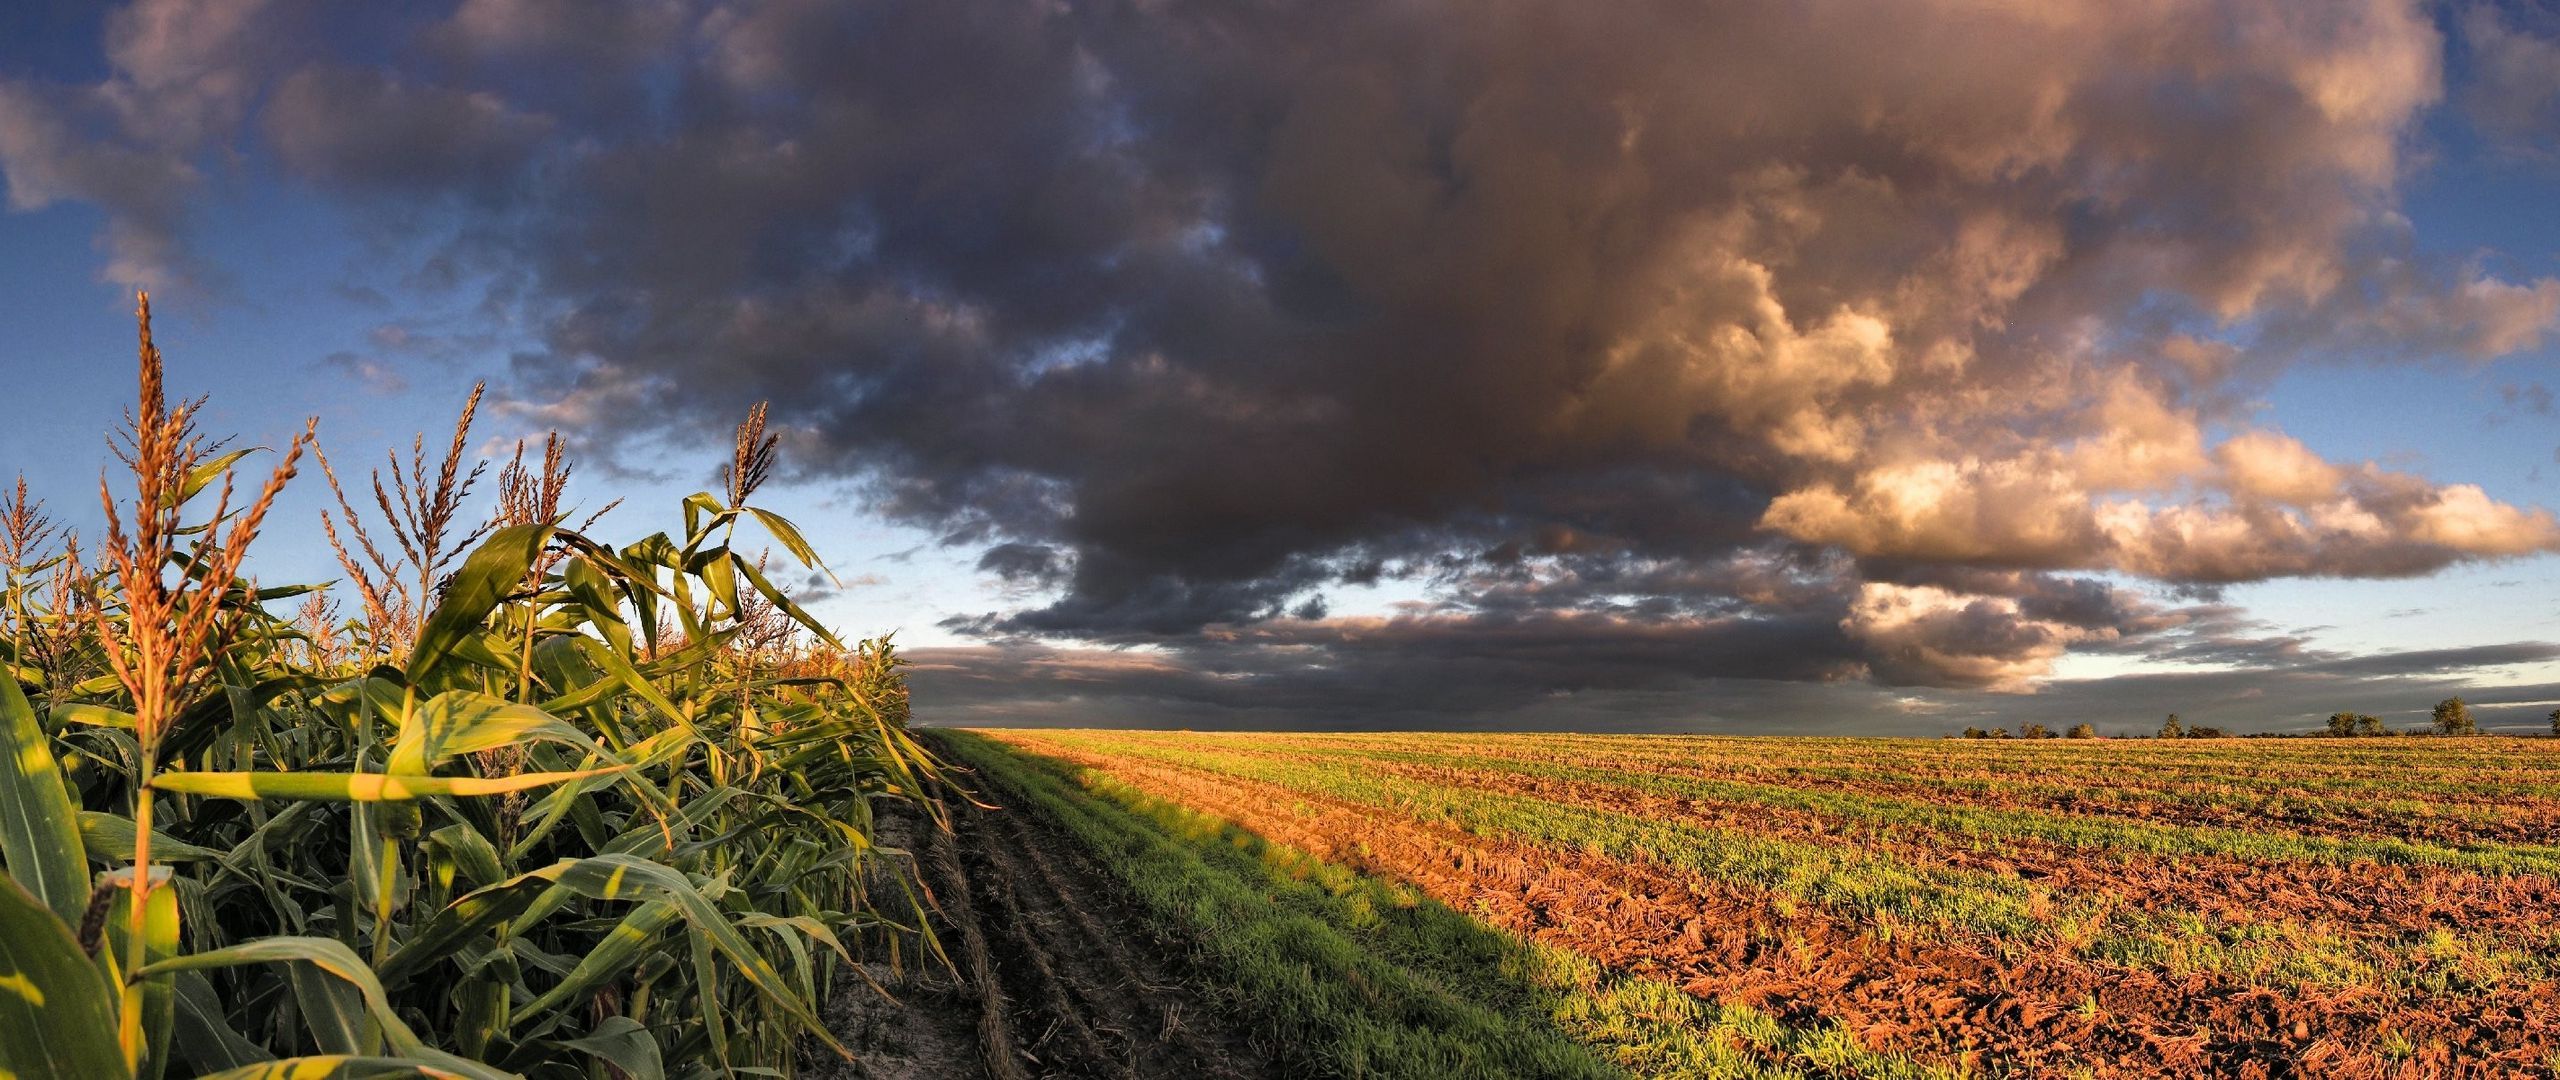 Download wallpaper 2560x1080 corn, field, sky, panorama, arable land, clouds dual wide 1080p HD background